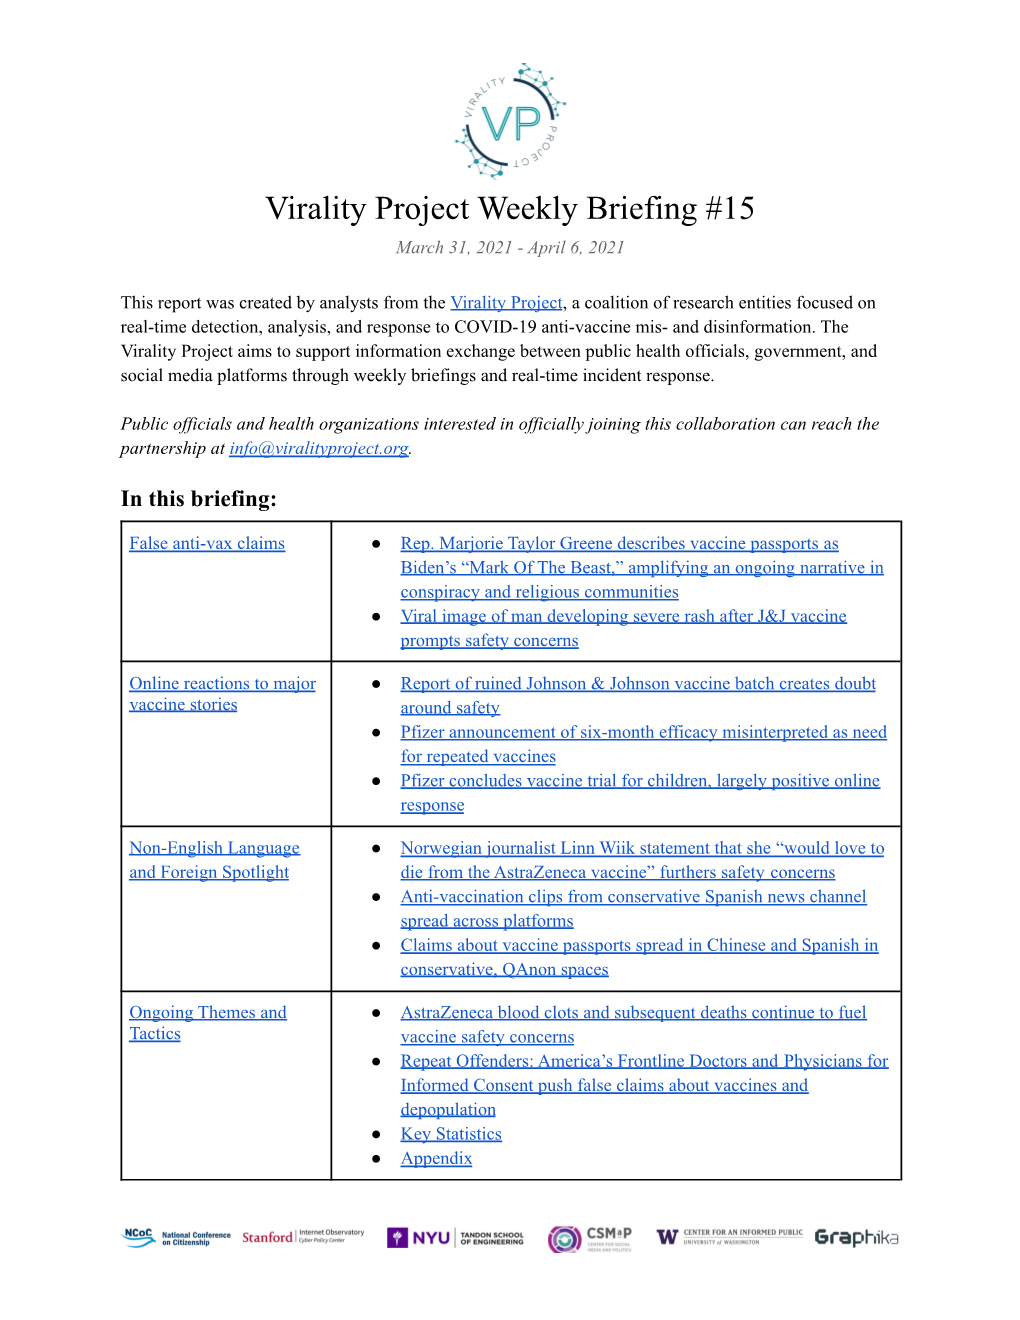 Virality Project Weekly Briefing 15